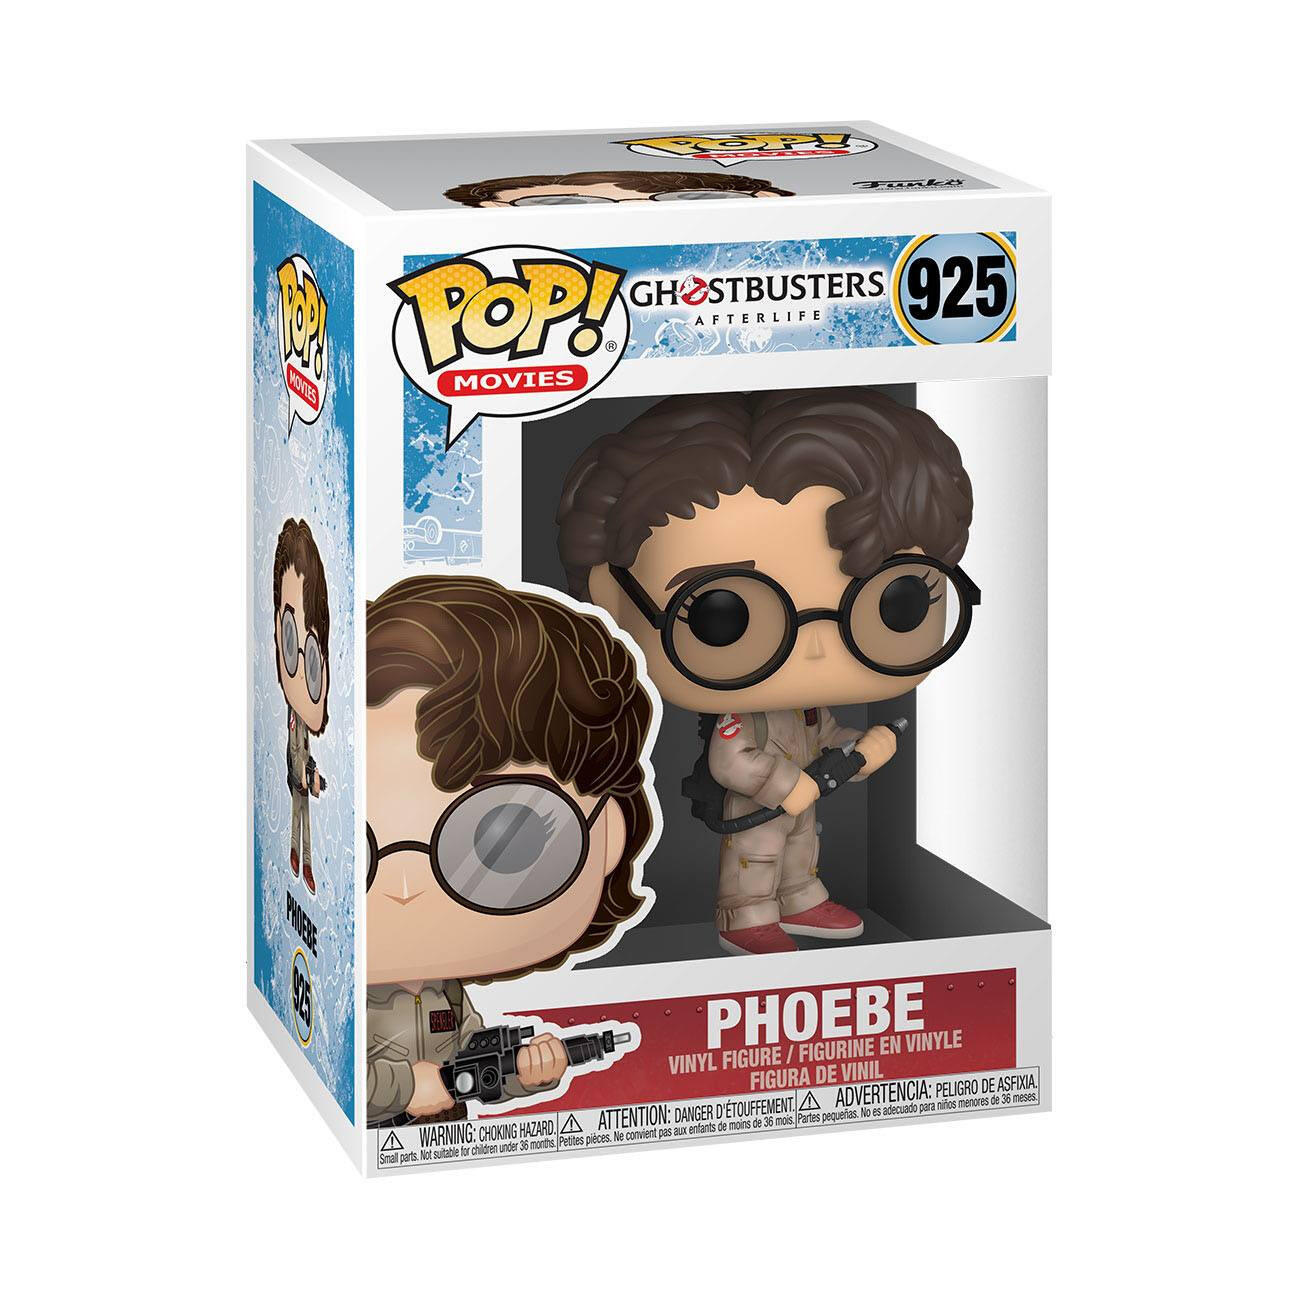 Pop! Movies: Ghostbusters Afterlife - Phoebe #925